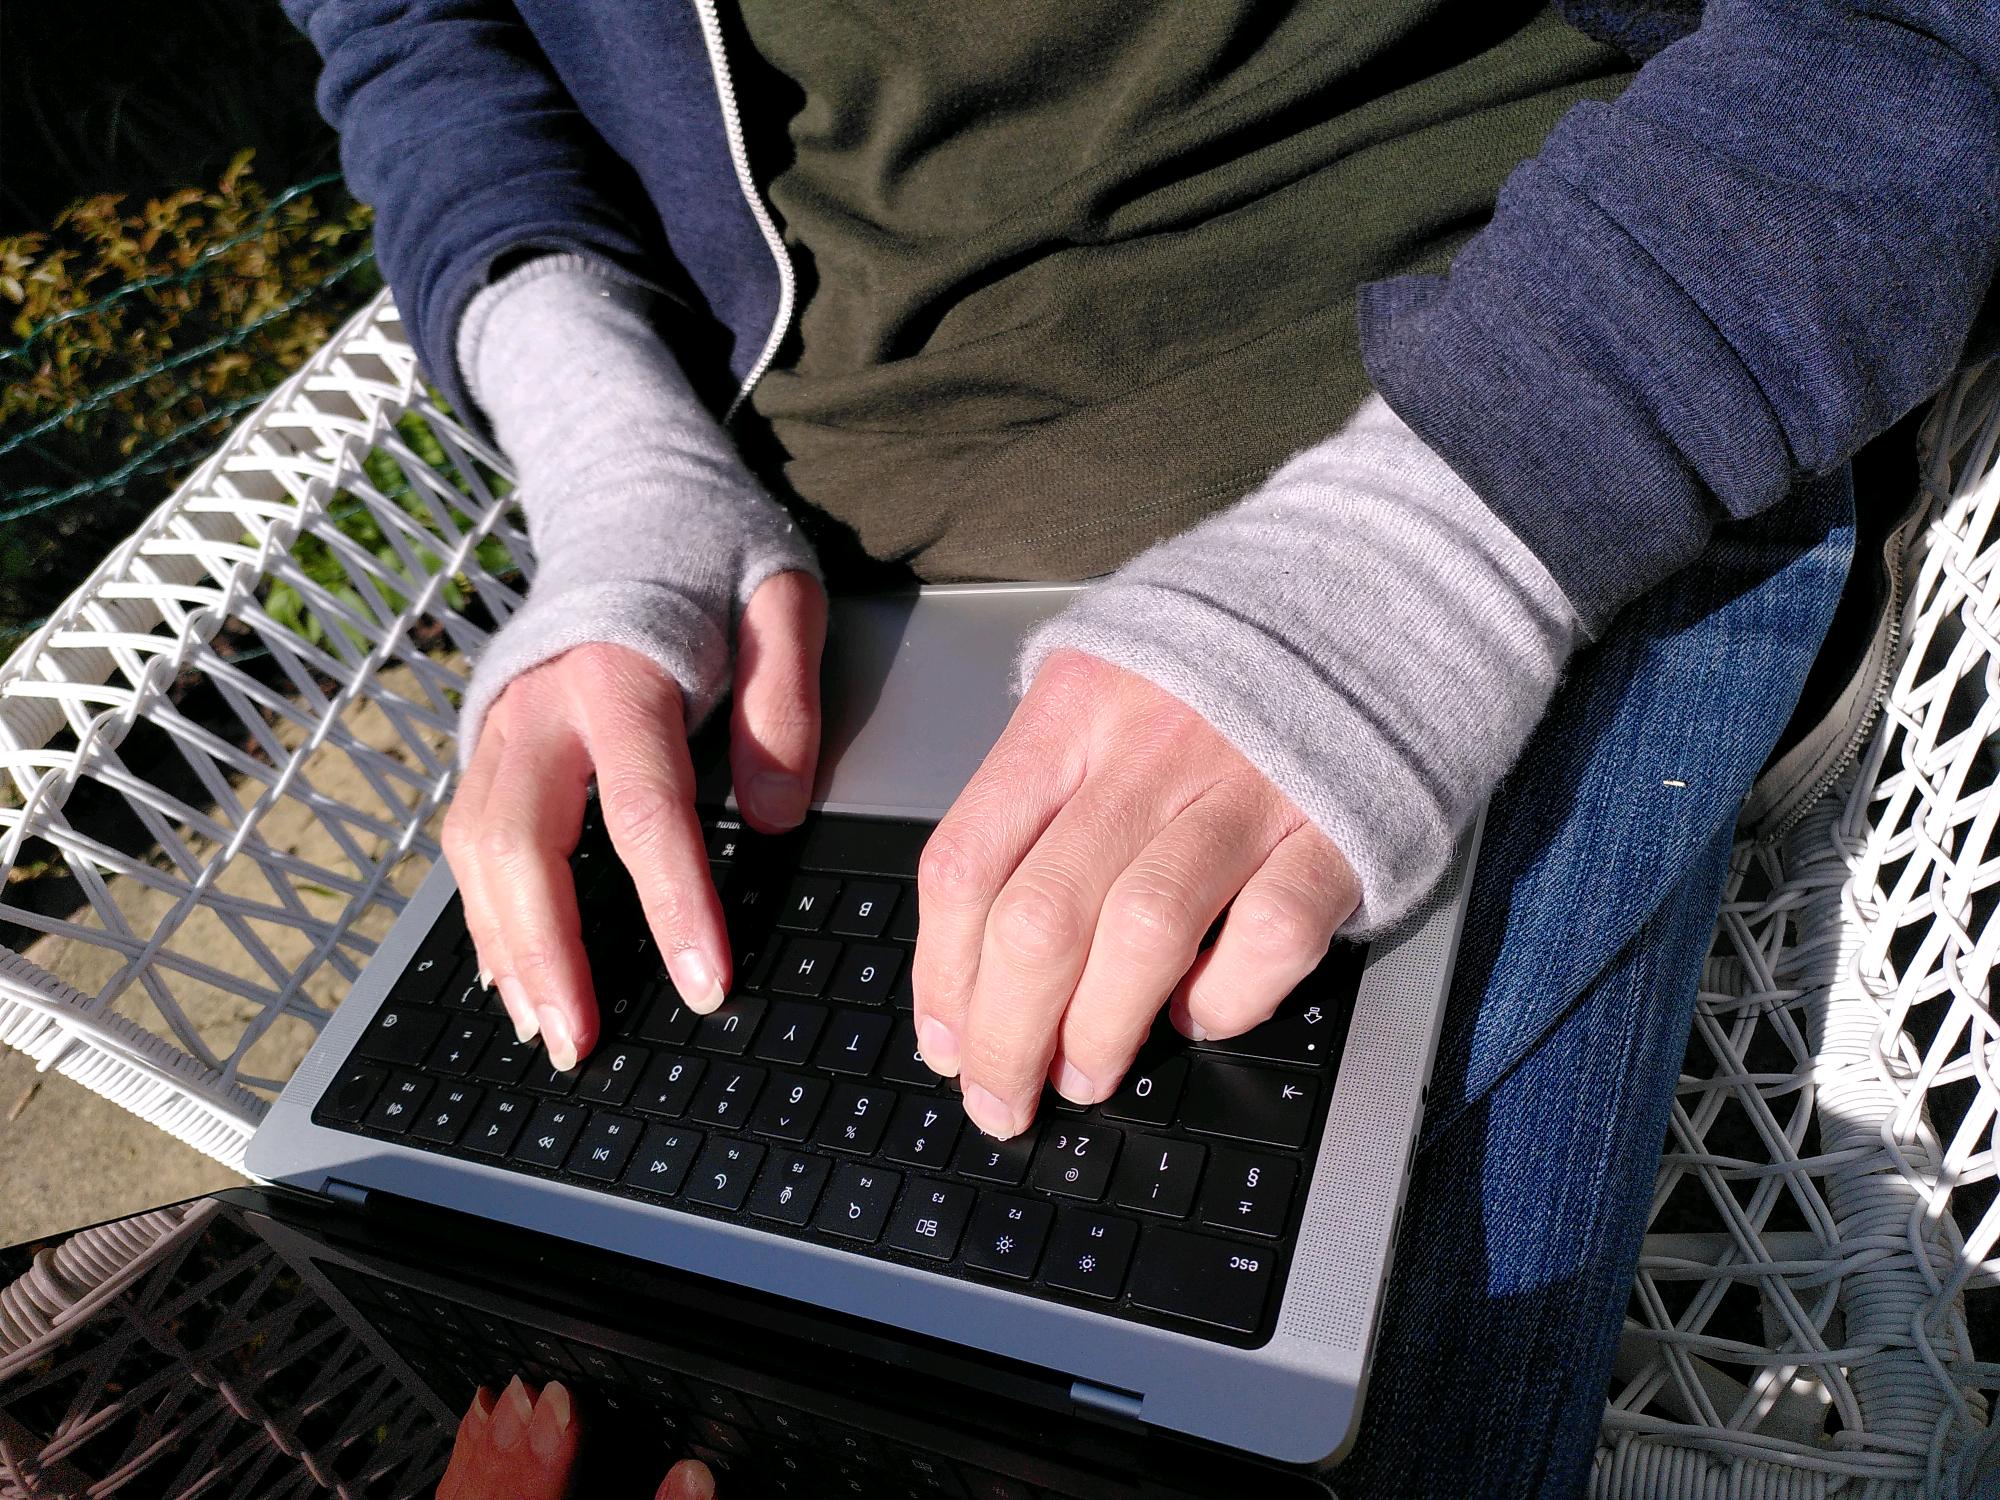 My hands on my laptop keyboard where my wrists and hands are covered in woolen tubes that leave my thumb and fingers free.